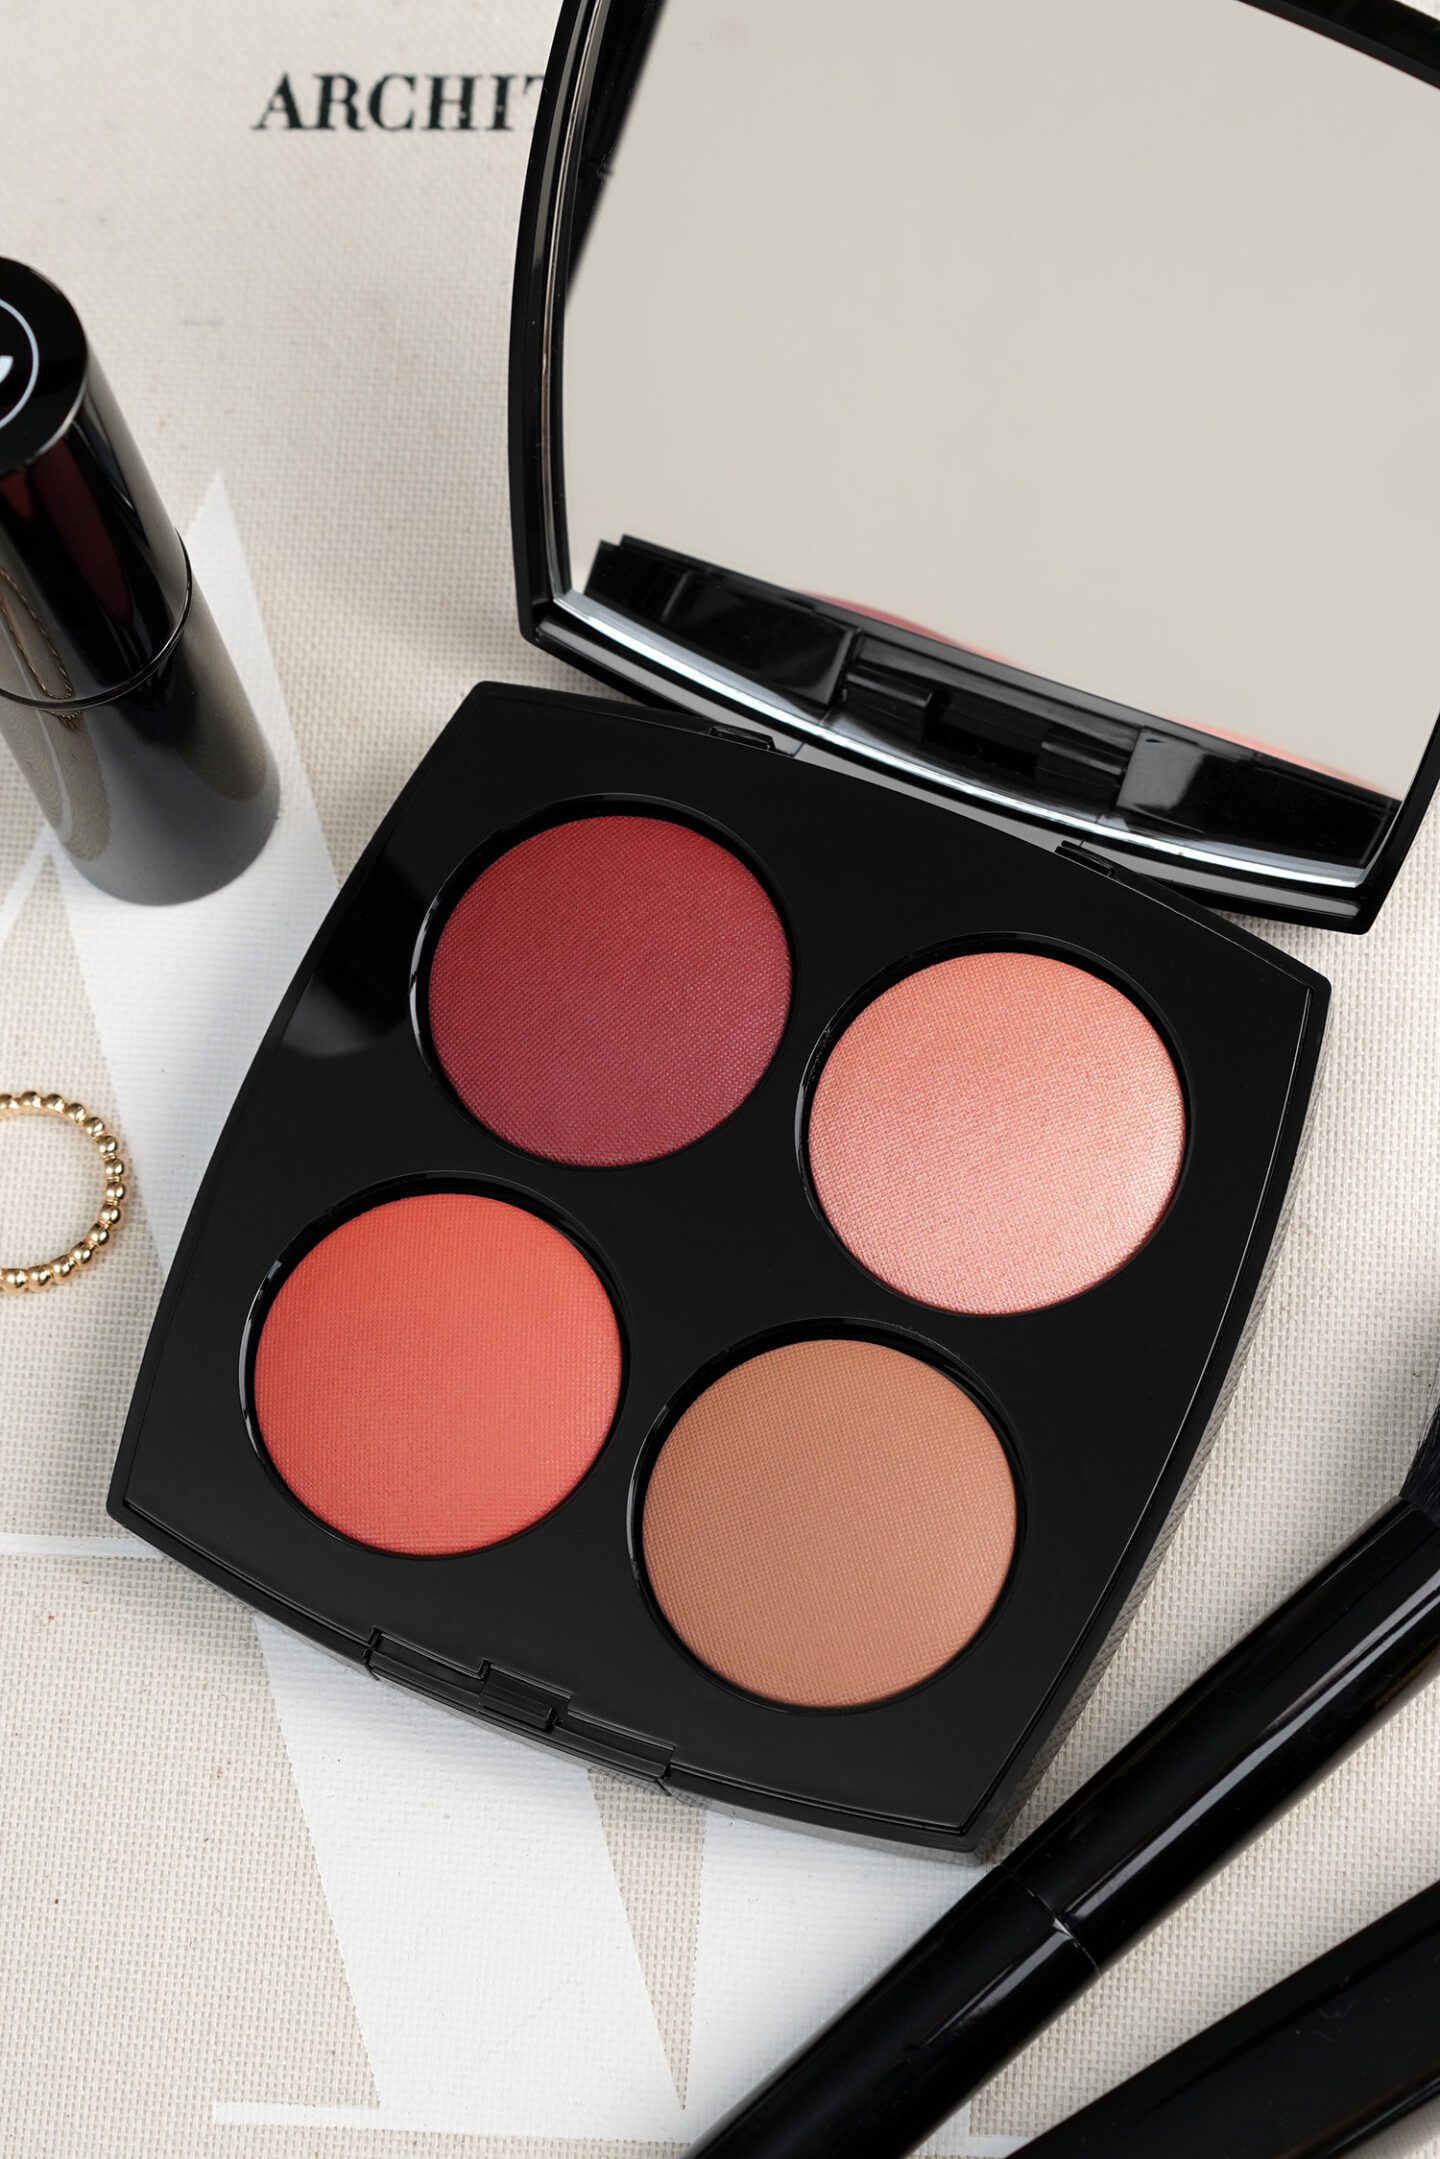 Chanel Les 4 Rouges Yeux Et Joues Eyeshadow and Blush Palette in Tendresse